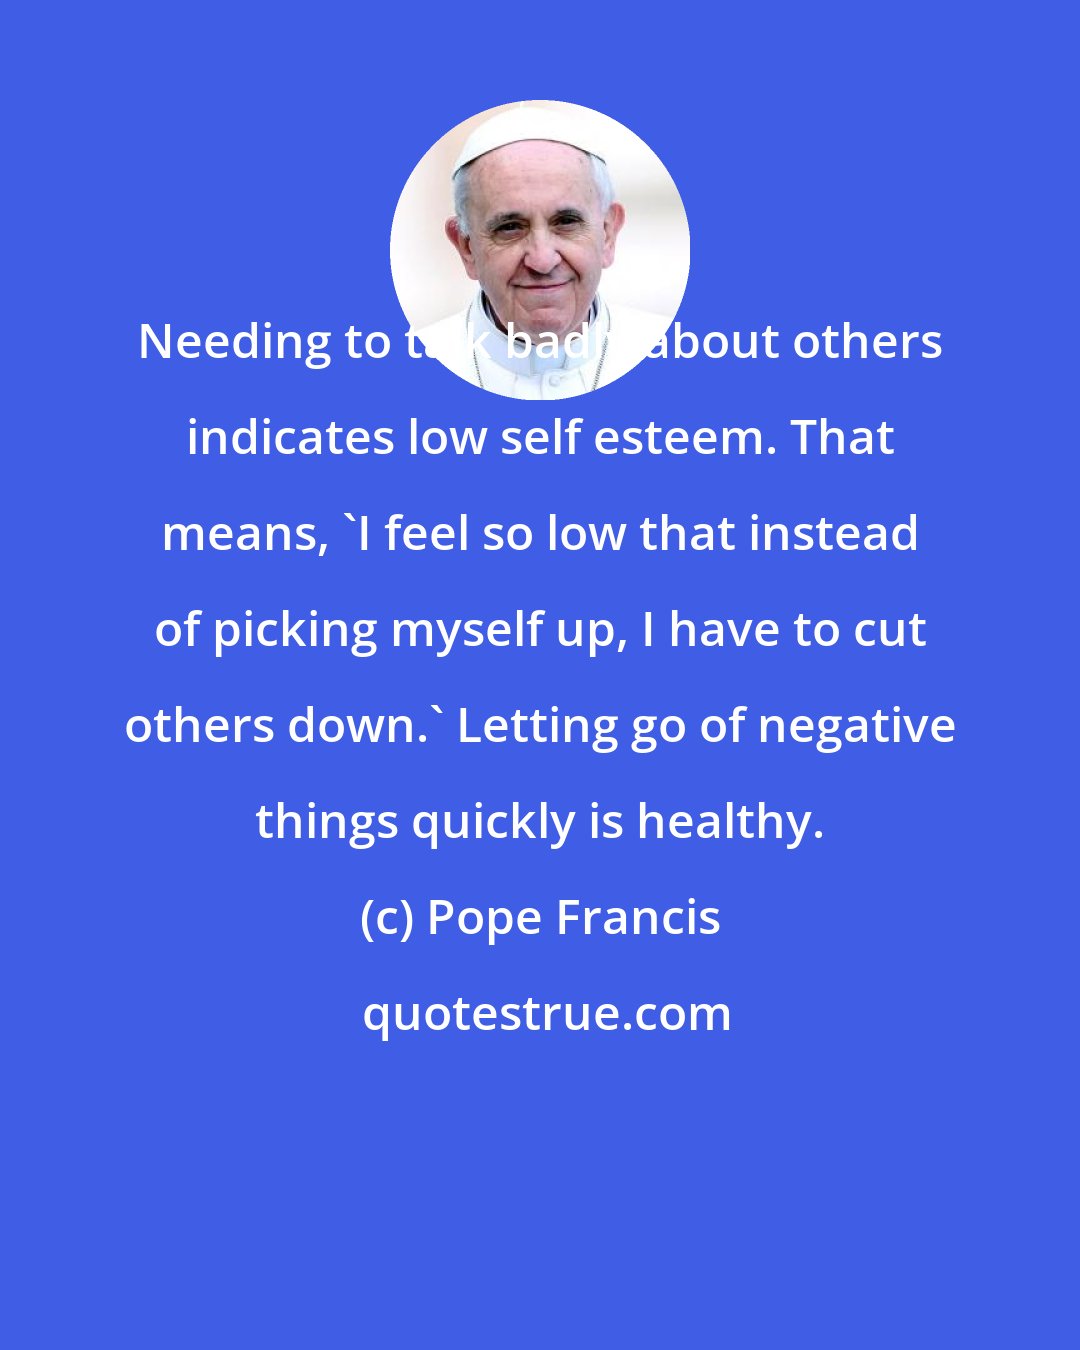 Pope Francis: Needing to talk badly about others indicates low self esteem. That means, 'I feel so low that instead of picking myself up, I have to cut others down.' Letting go of negative things quickly is healthy.